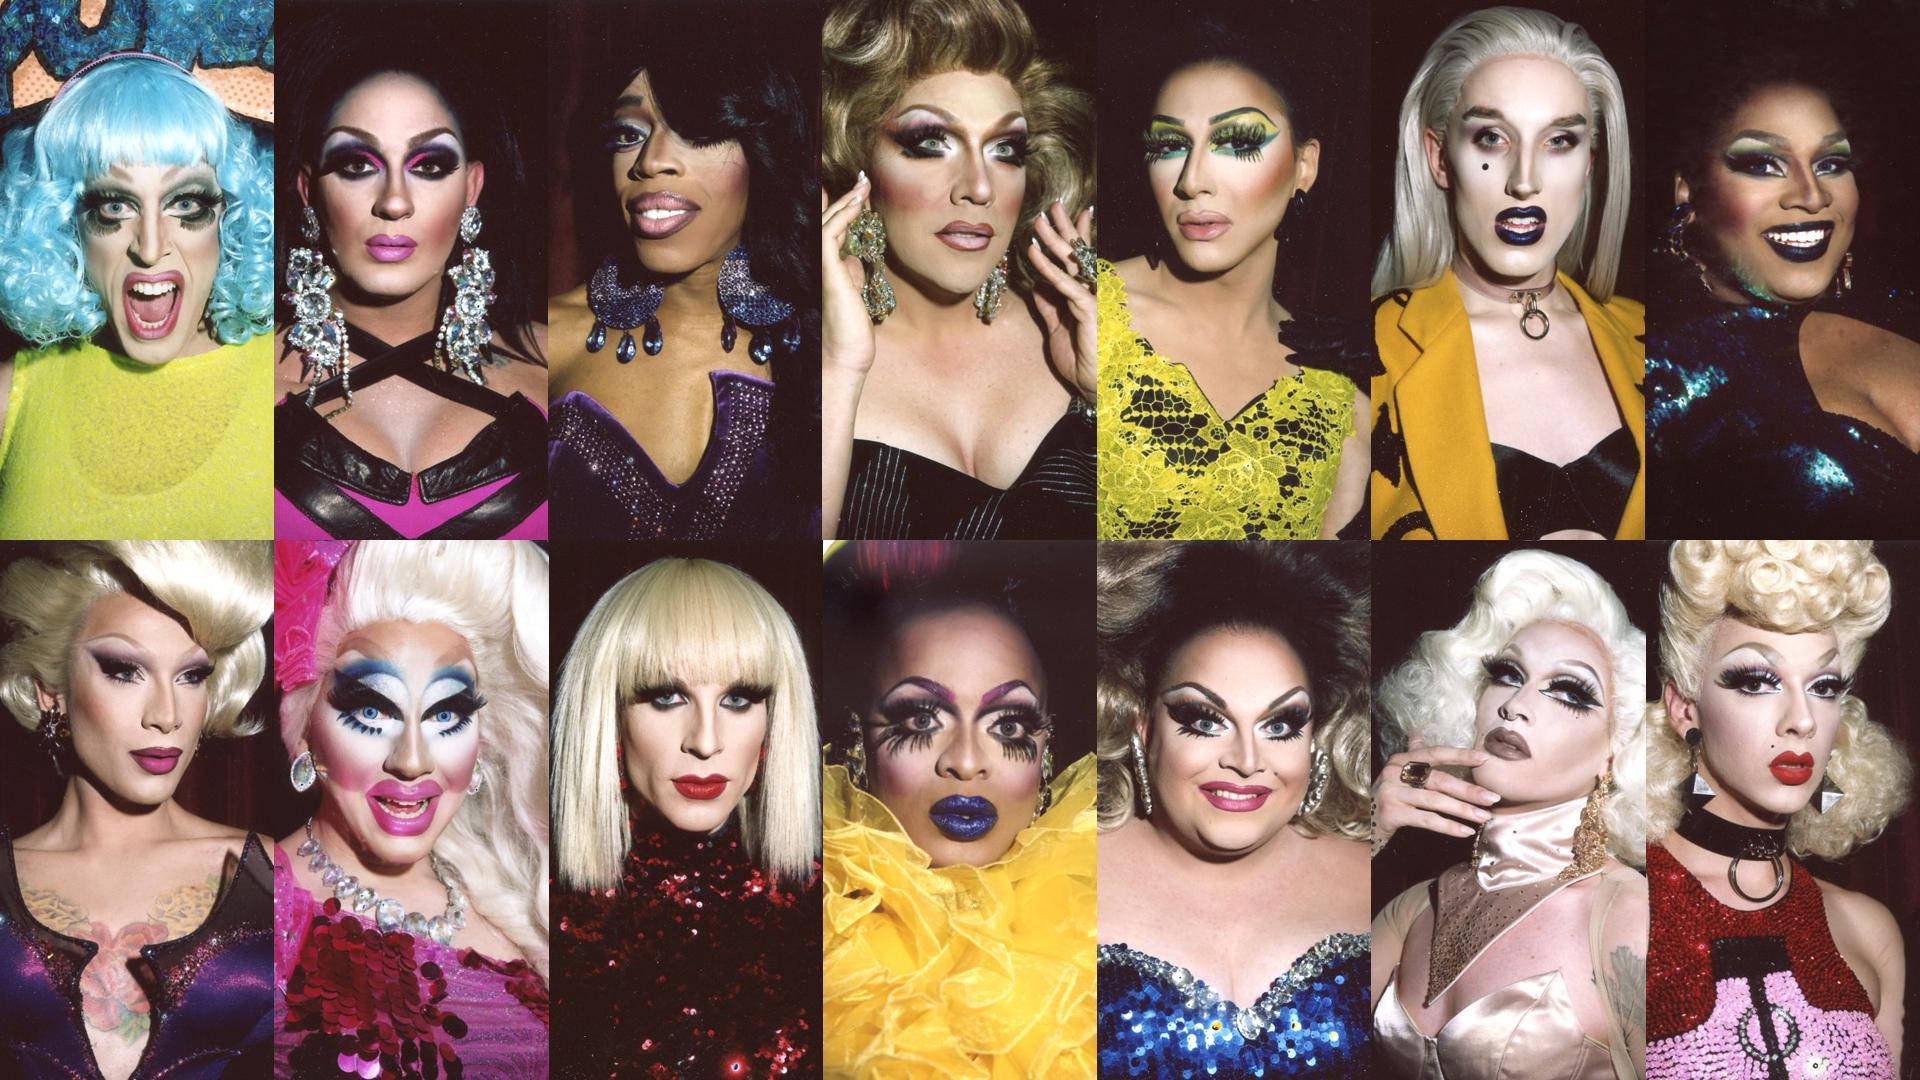 Rupaul's Drag Race The Drag Queens Background